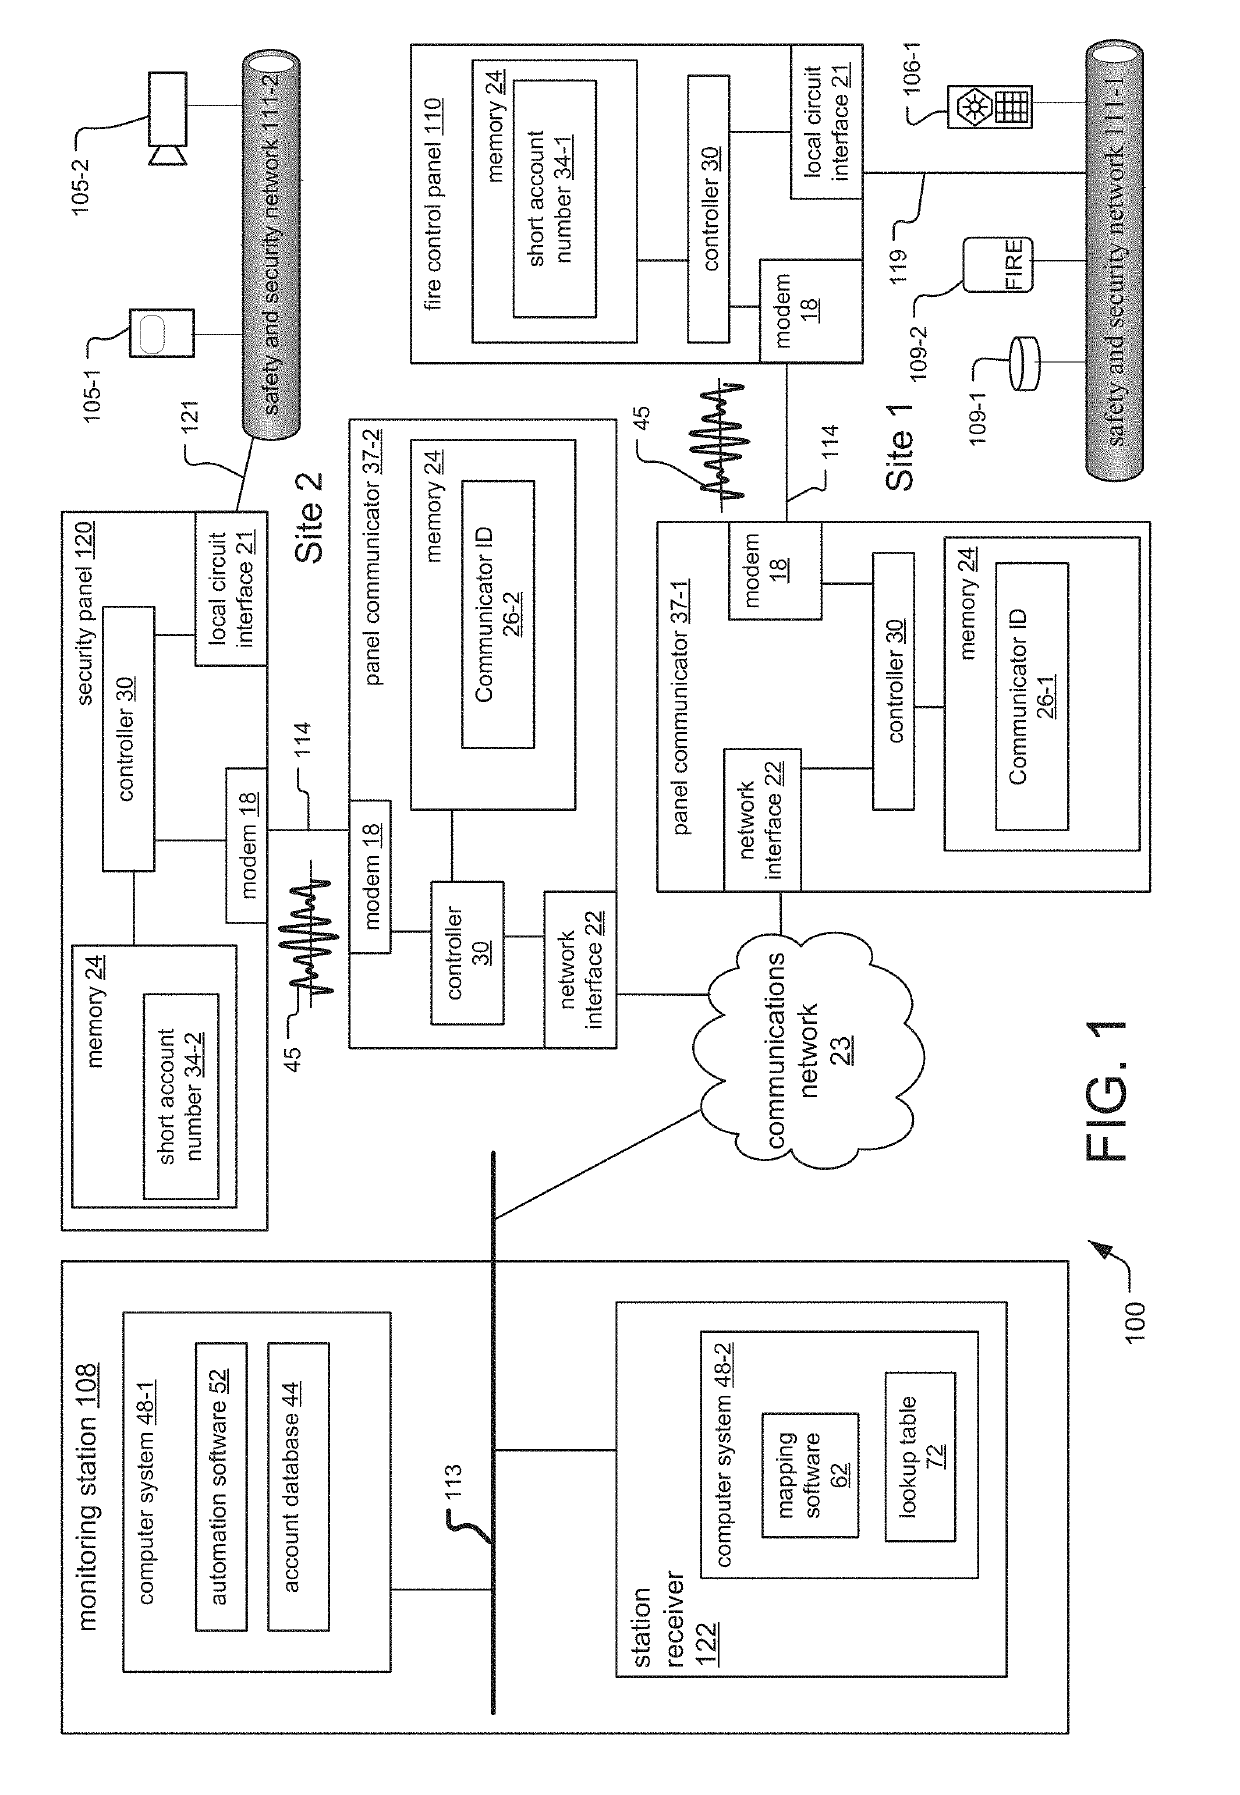 Account number substitution for dial capture and IP based communicators